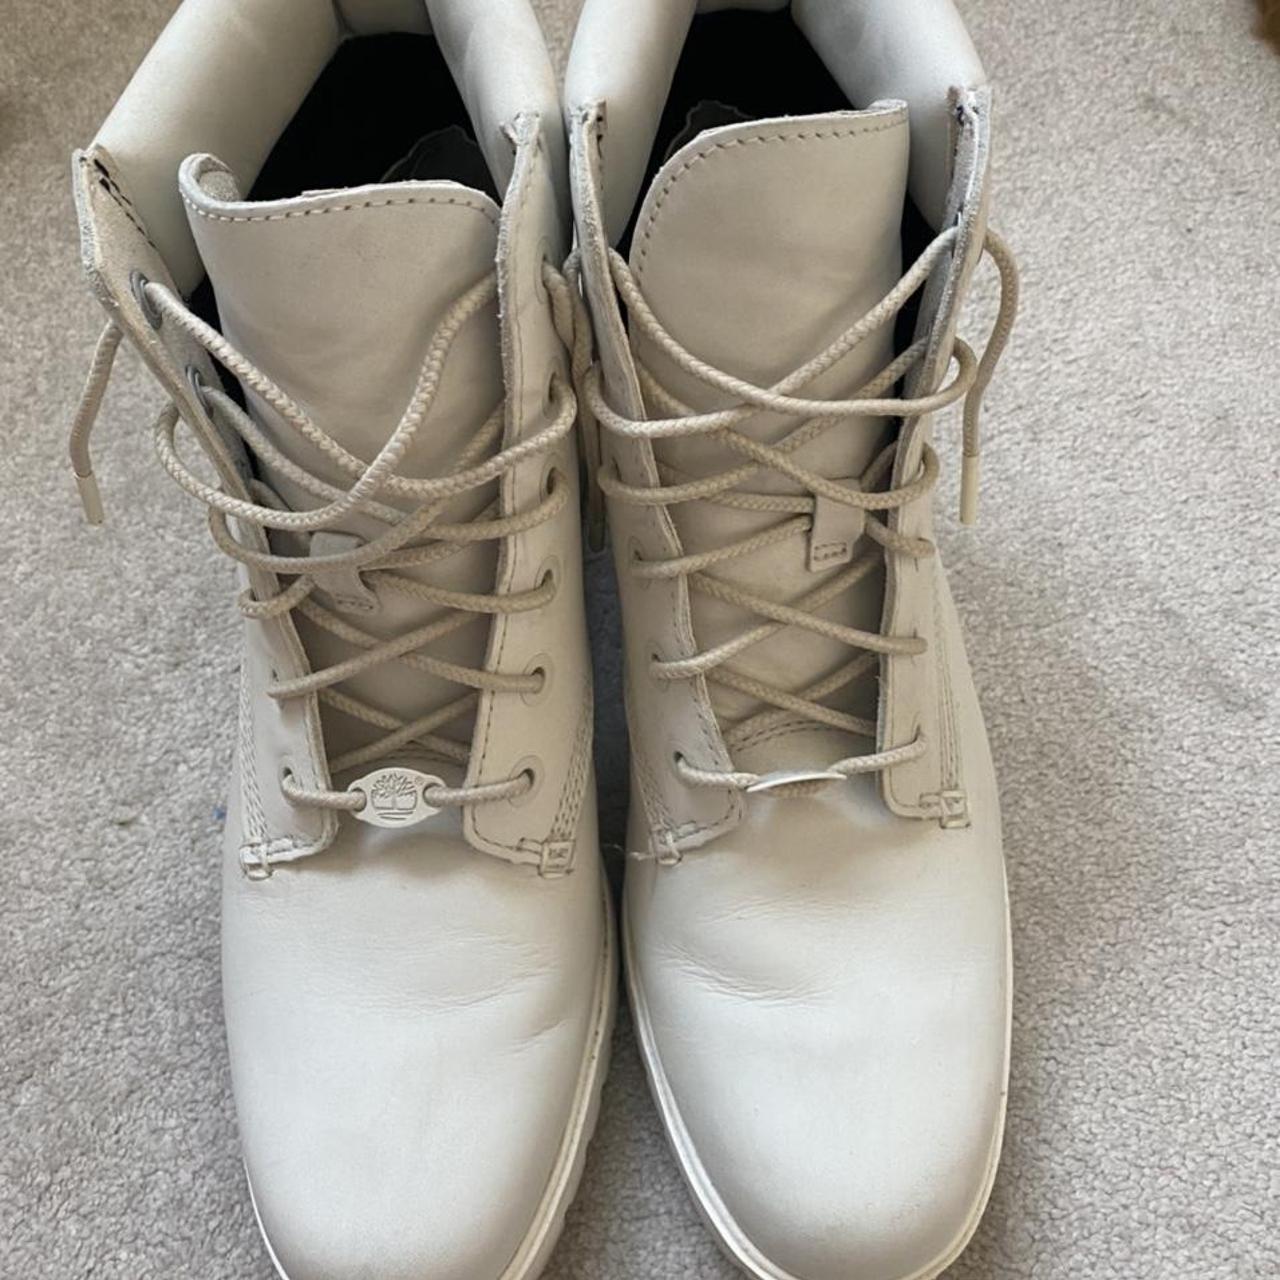 Timberland 6 inch premium ghost white boots -... - Depop